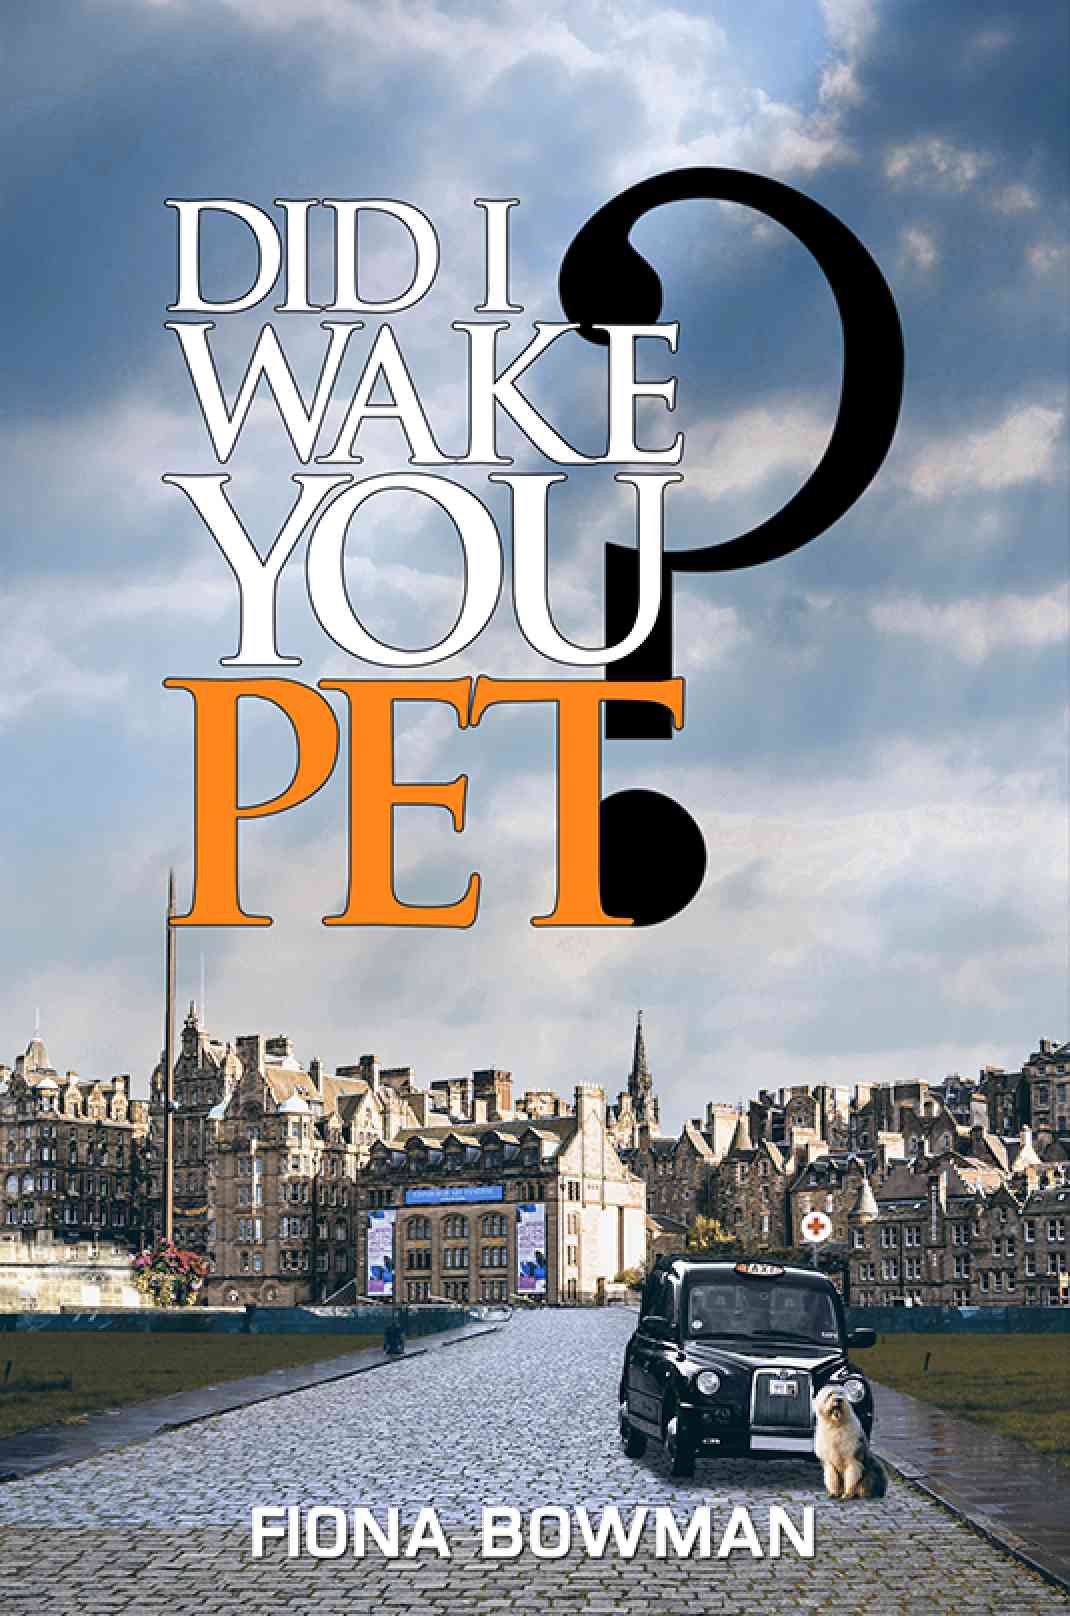 Phoenix FM talks to Author Fiona Bowman about her book 'Did I Wake You Pet?'